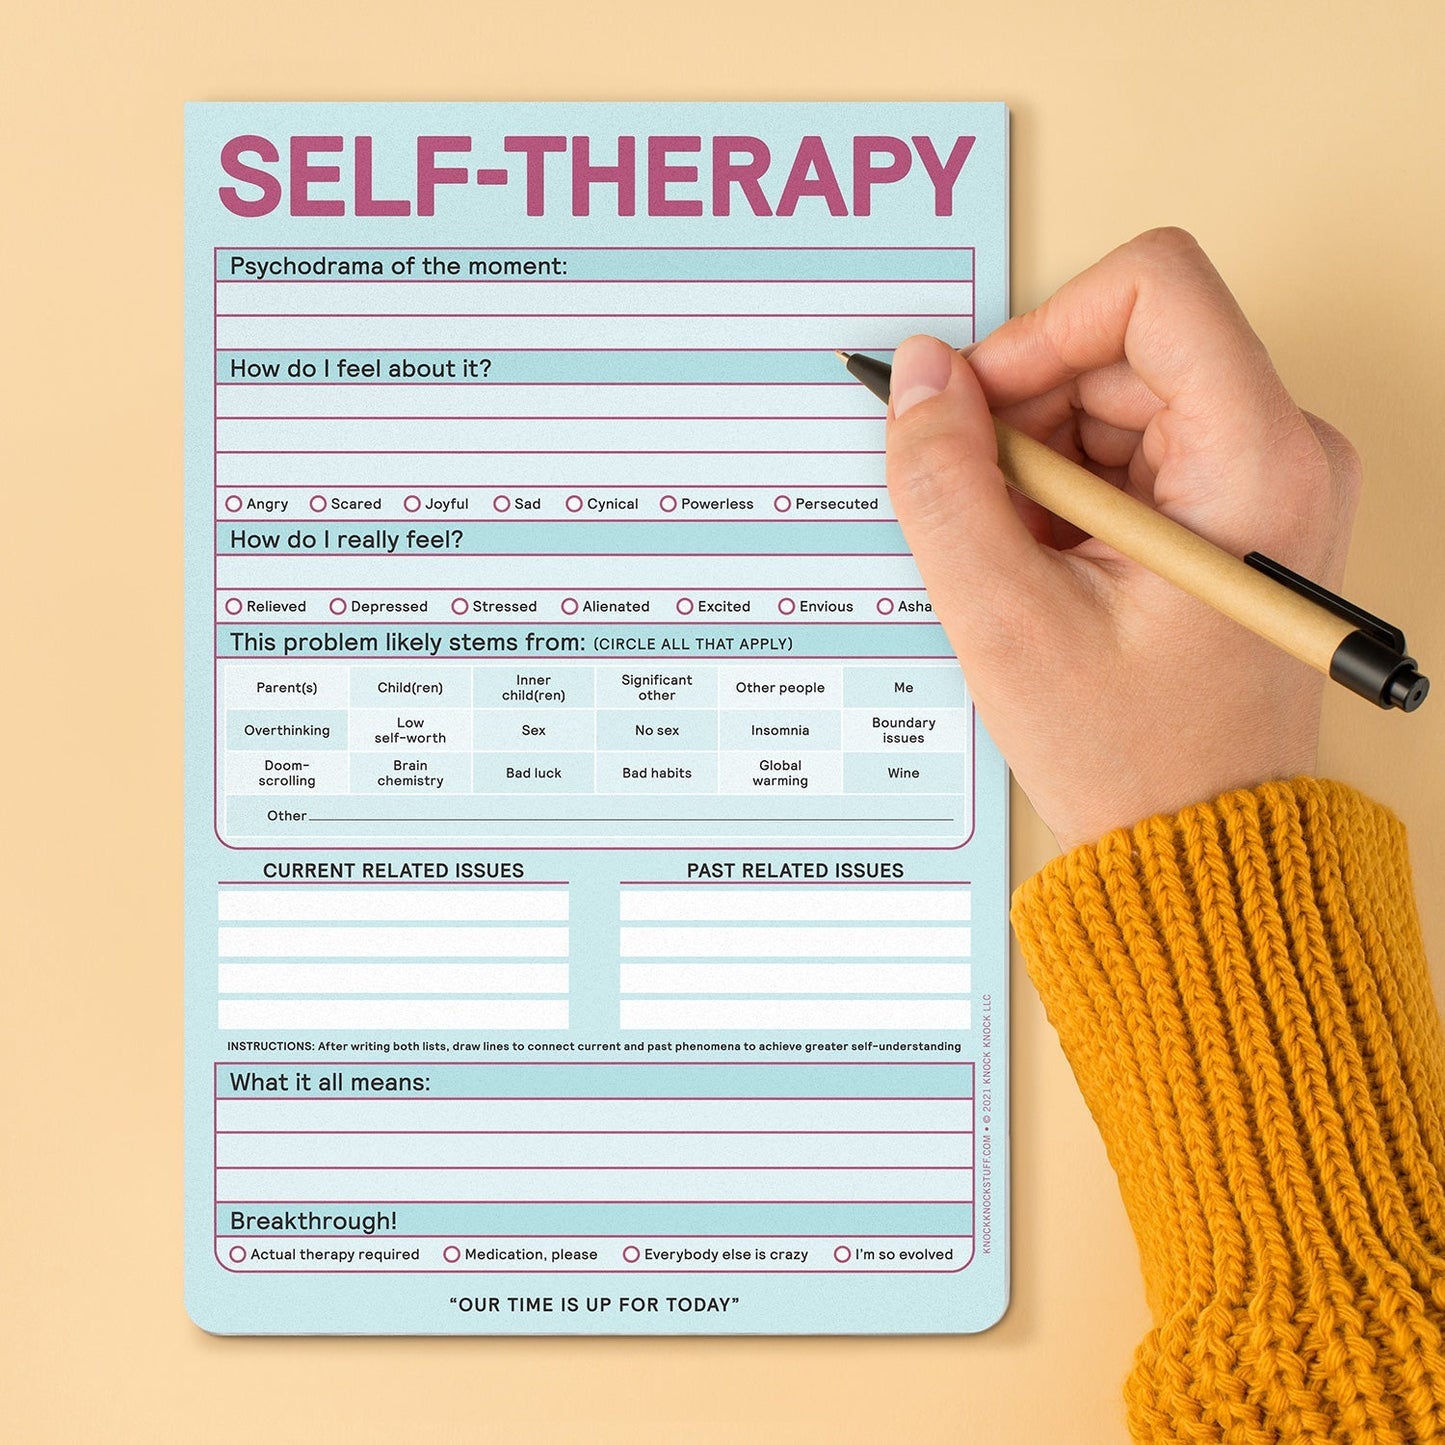 Self-Therapy Notepad in Pastel Blue